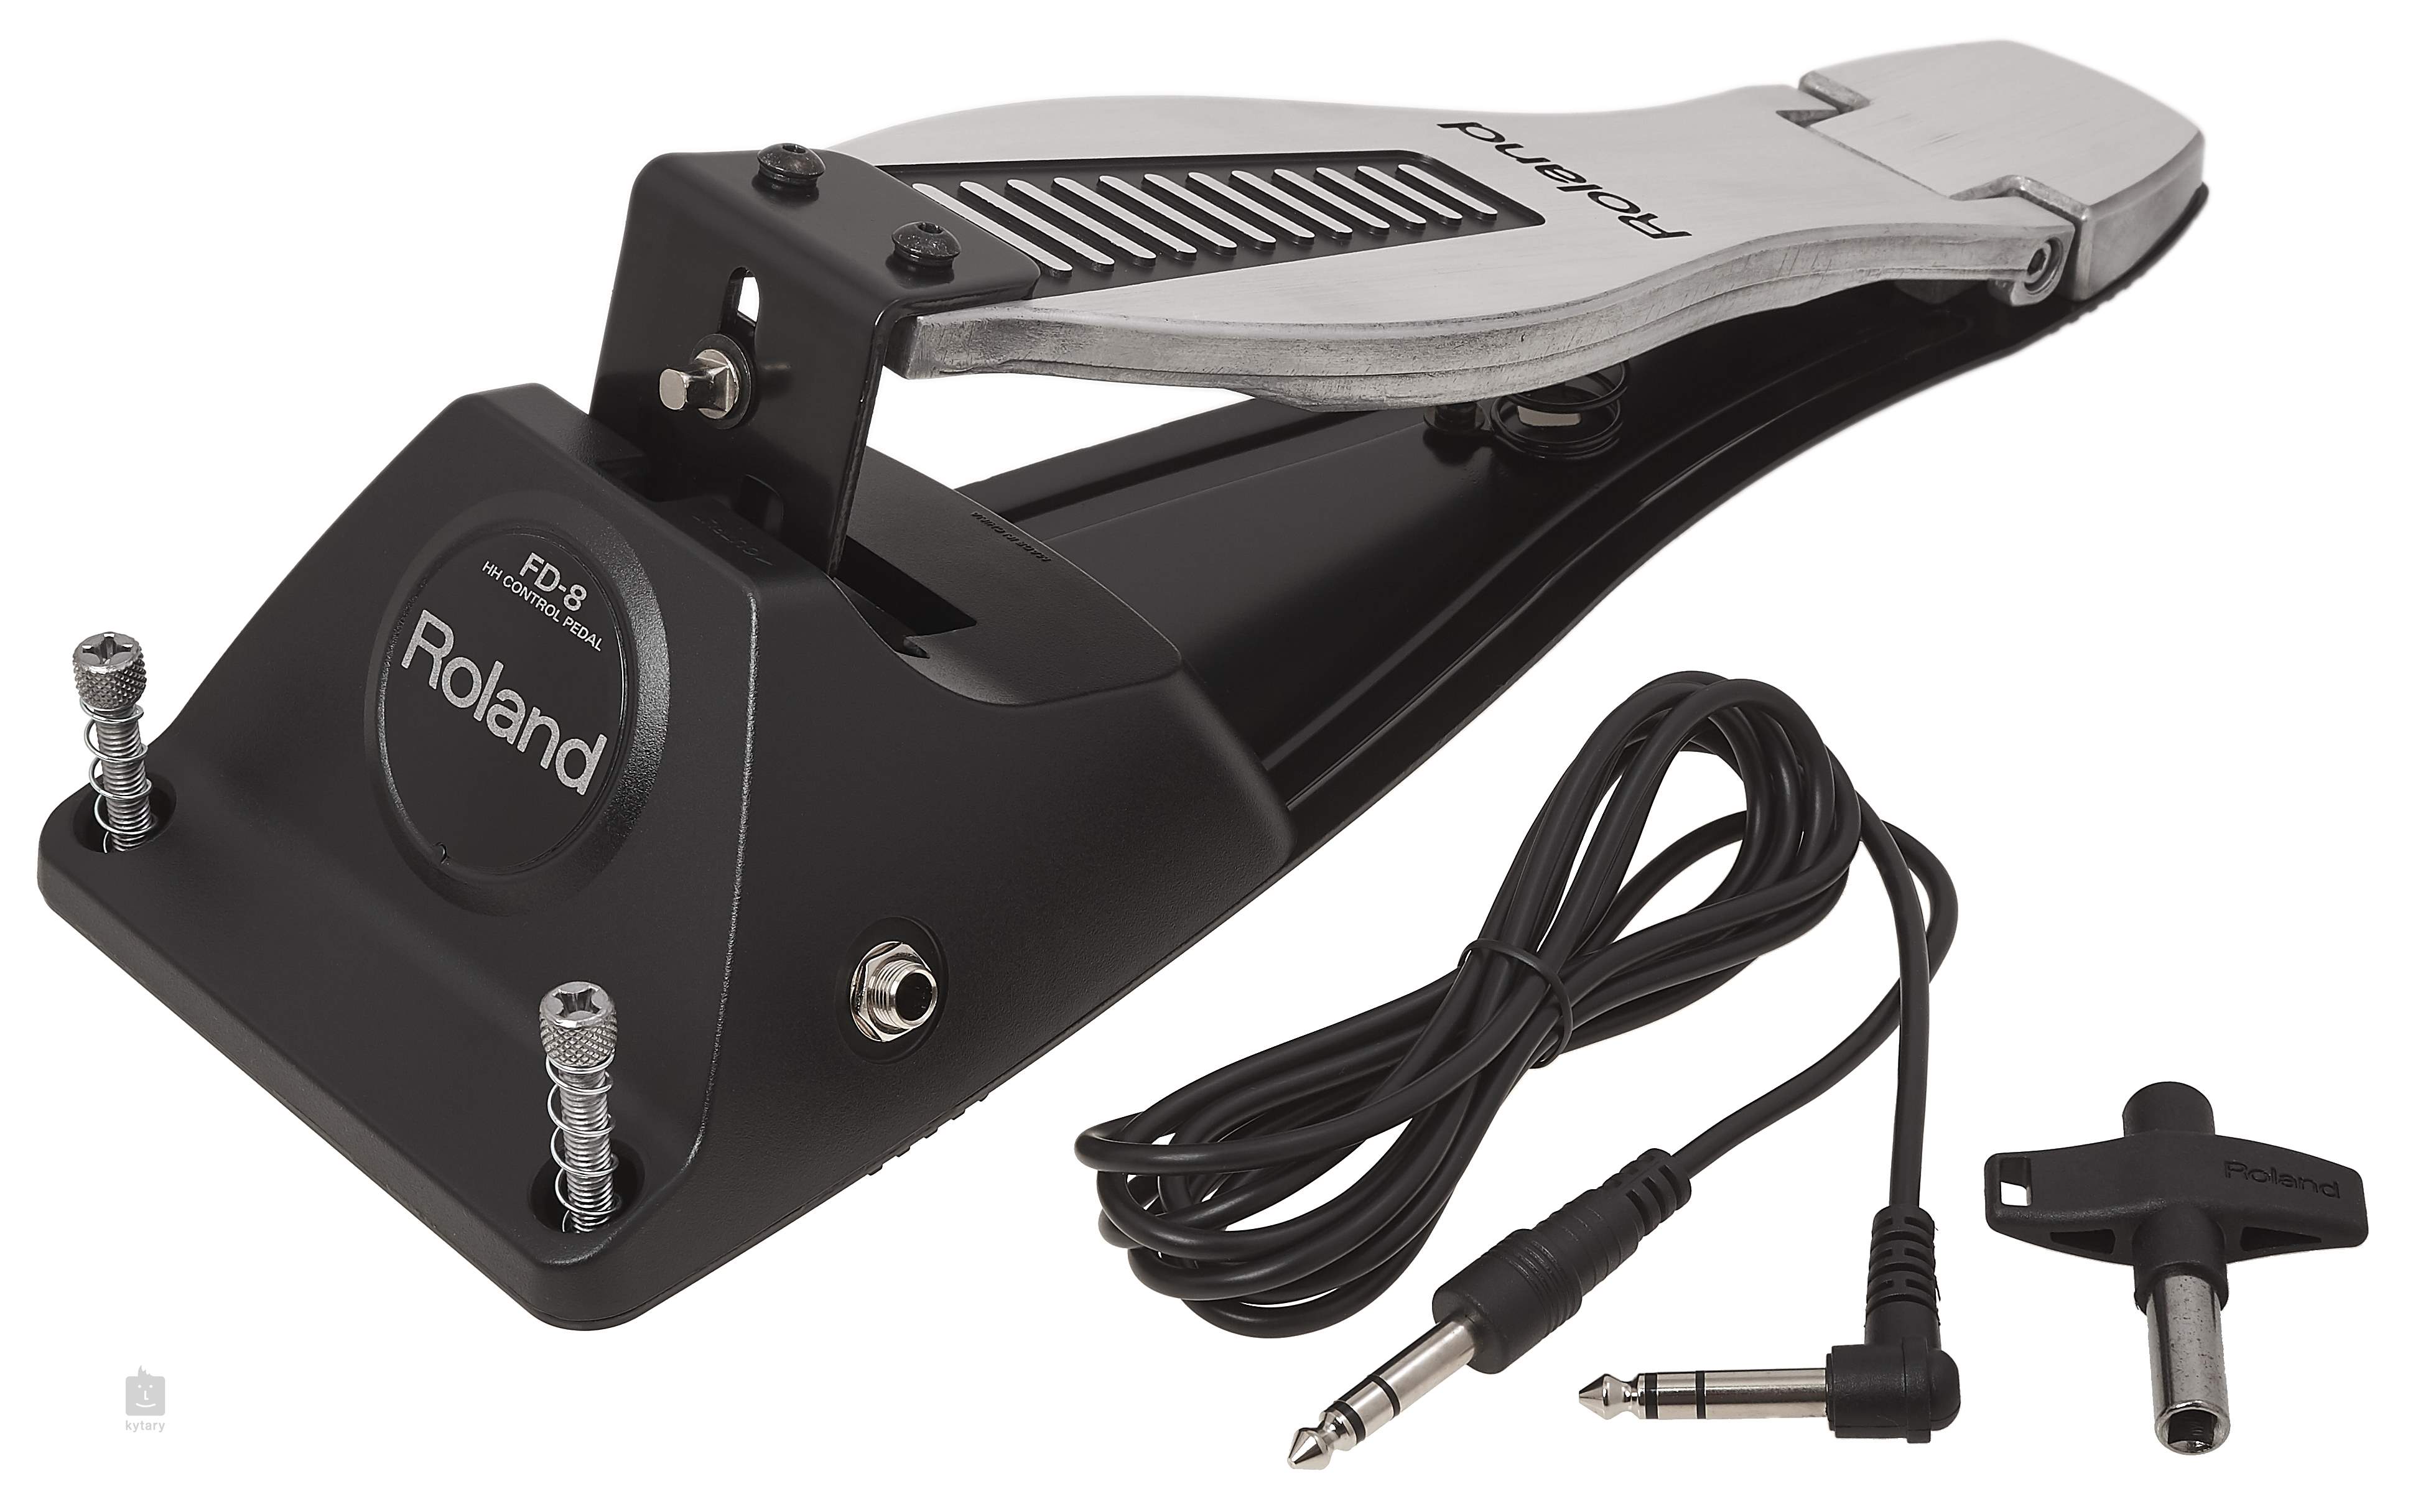 ROLAND FD 8 Hi-Hat Pedal | Kytary.ie